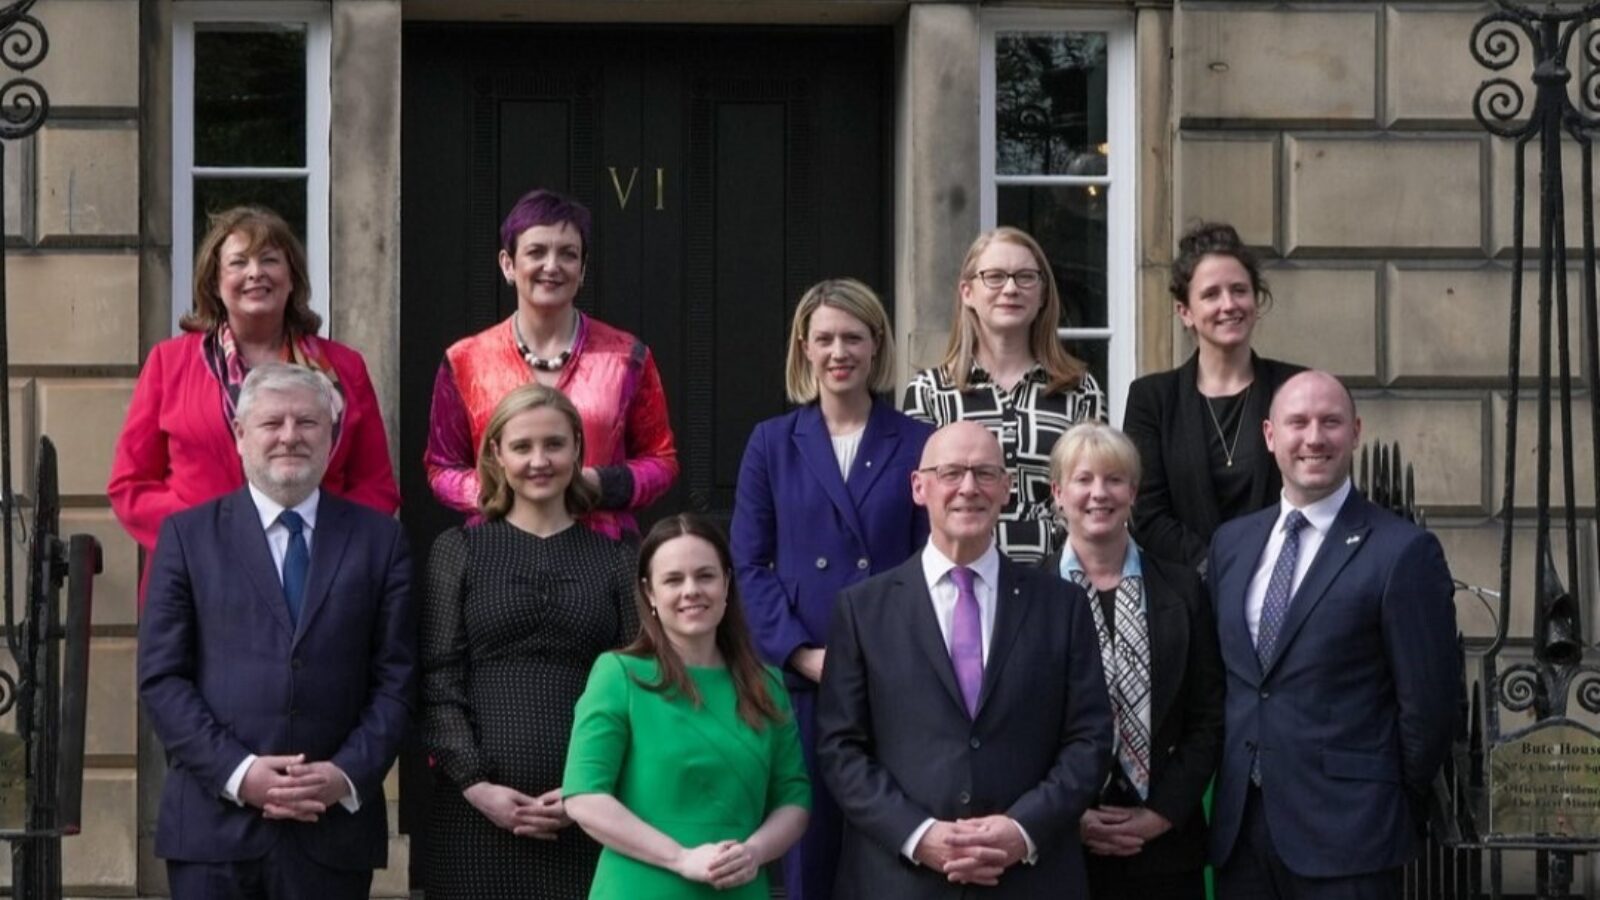 Swinney resists making wholesale changes to cabinet